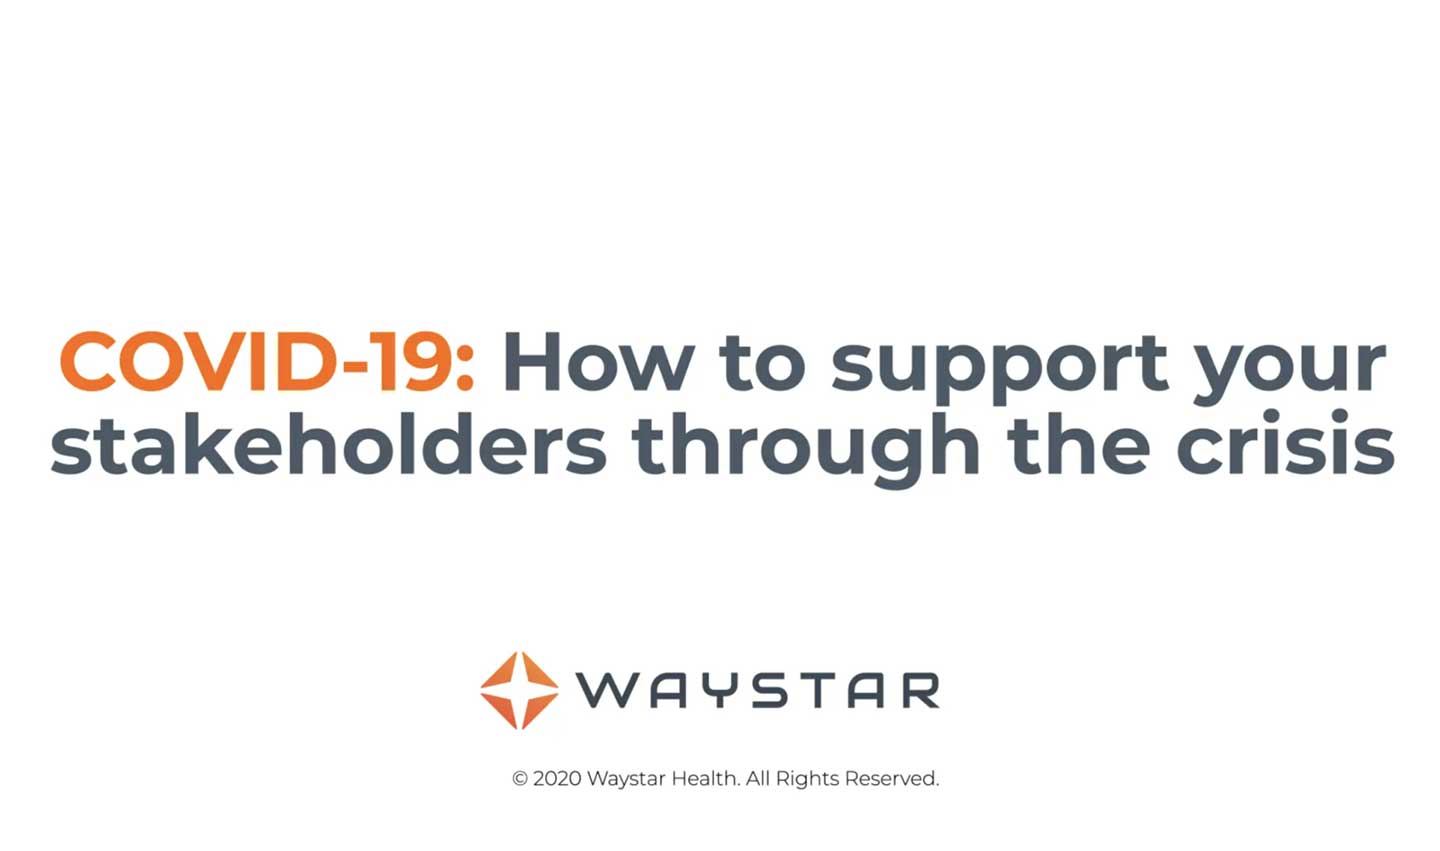 Supporting your stakeholders through the COVID-19 crisis